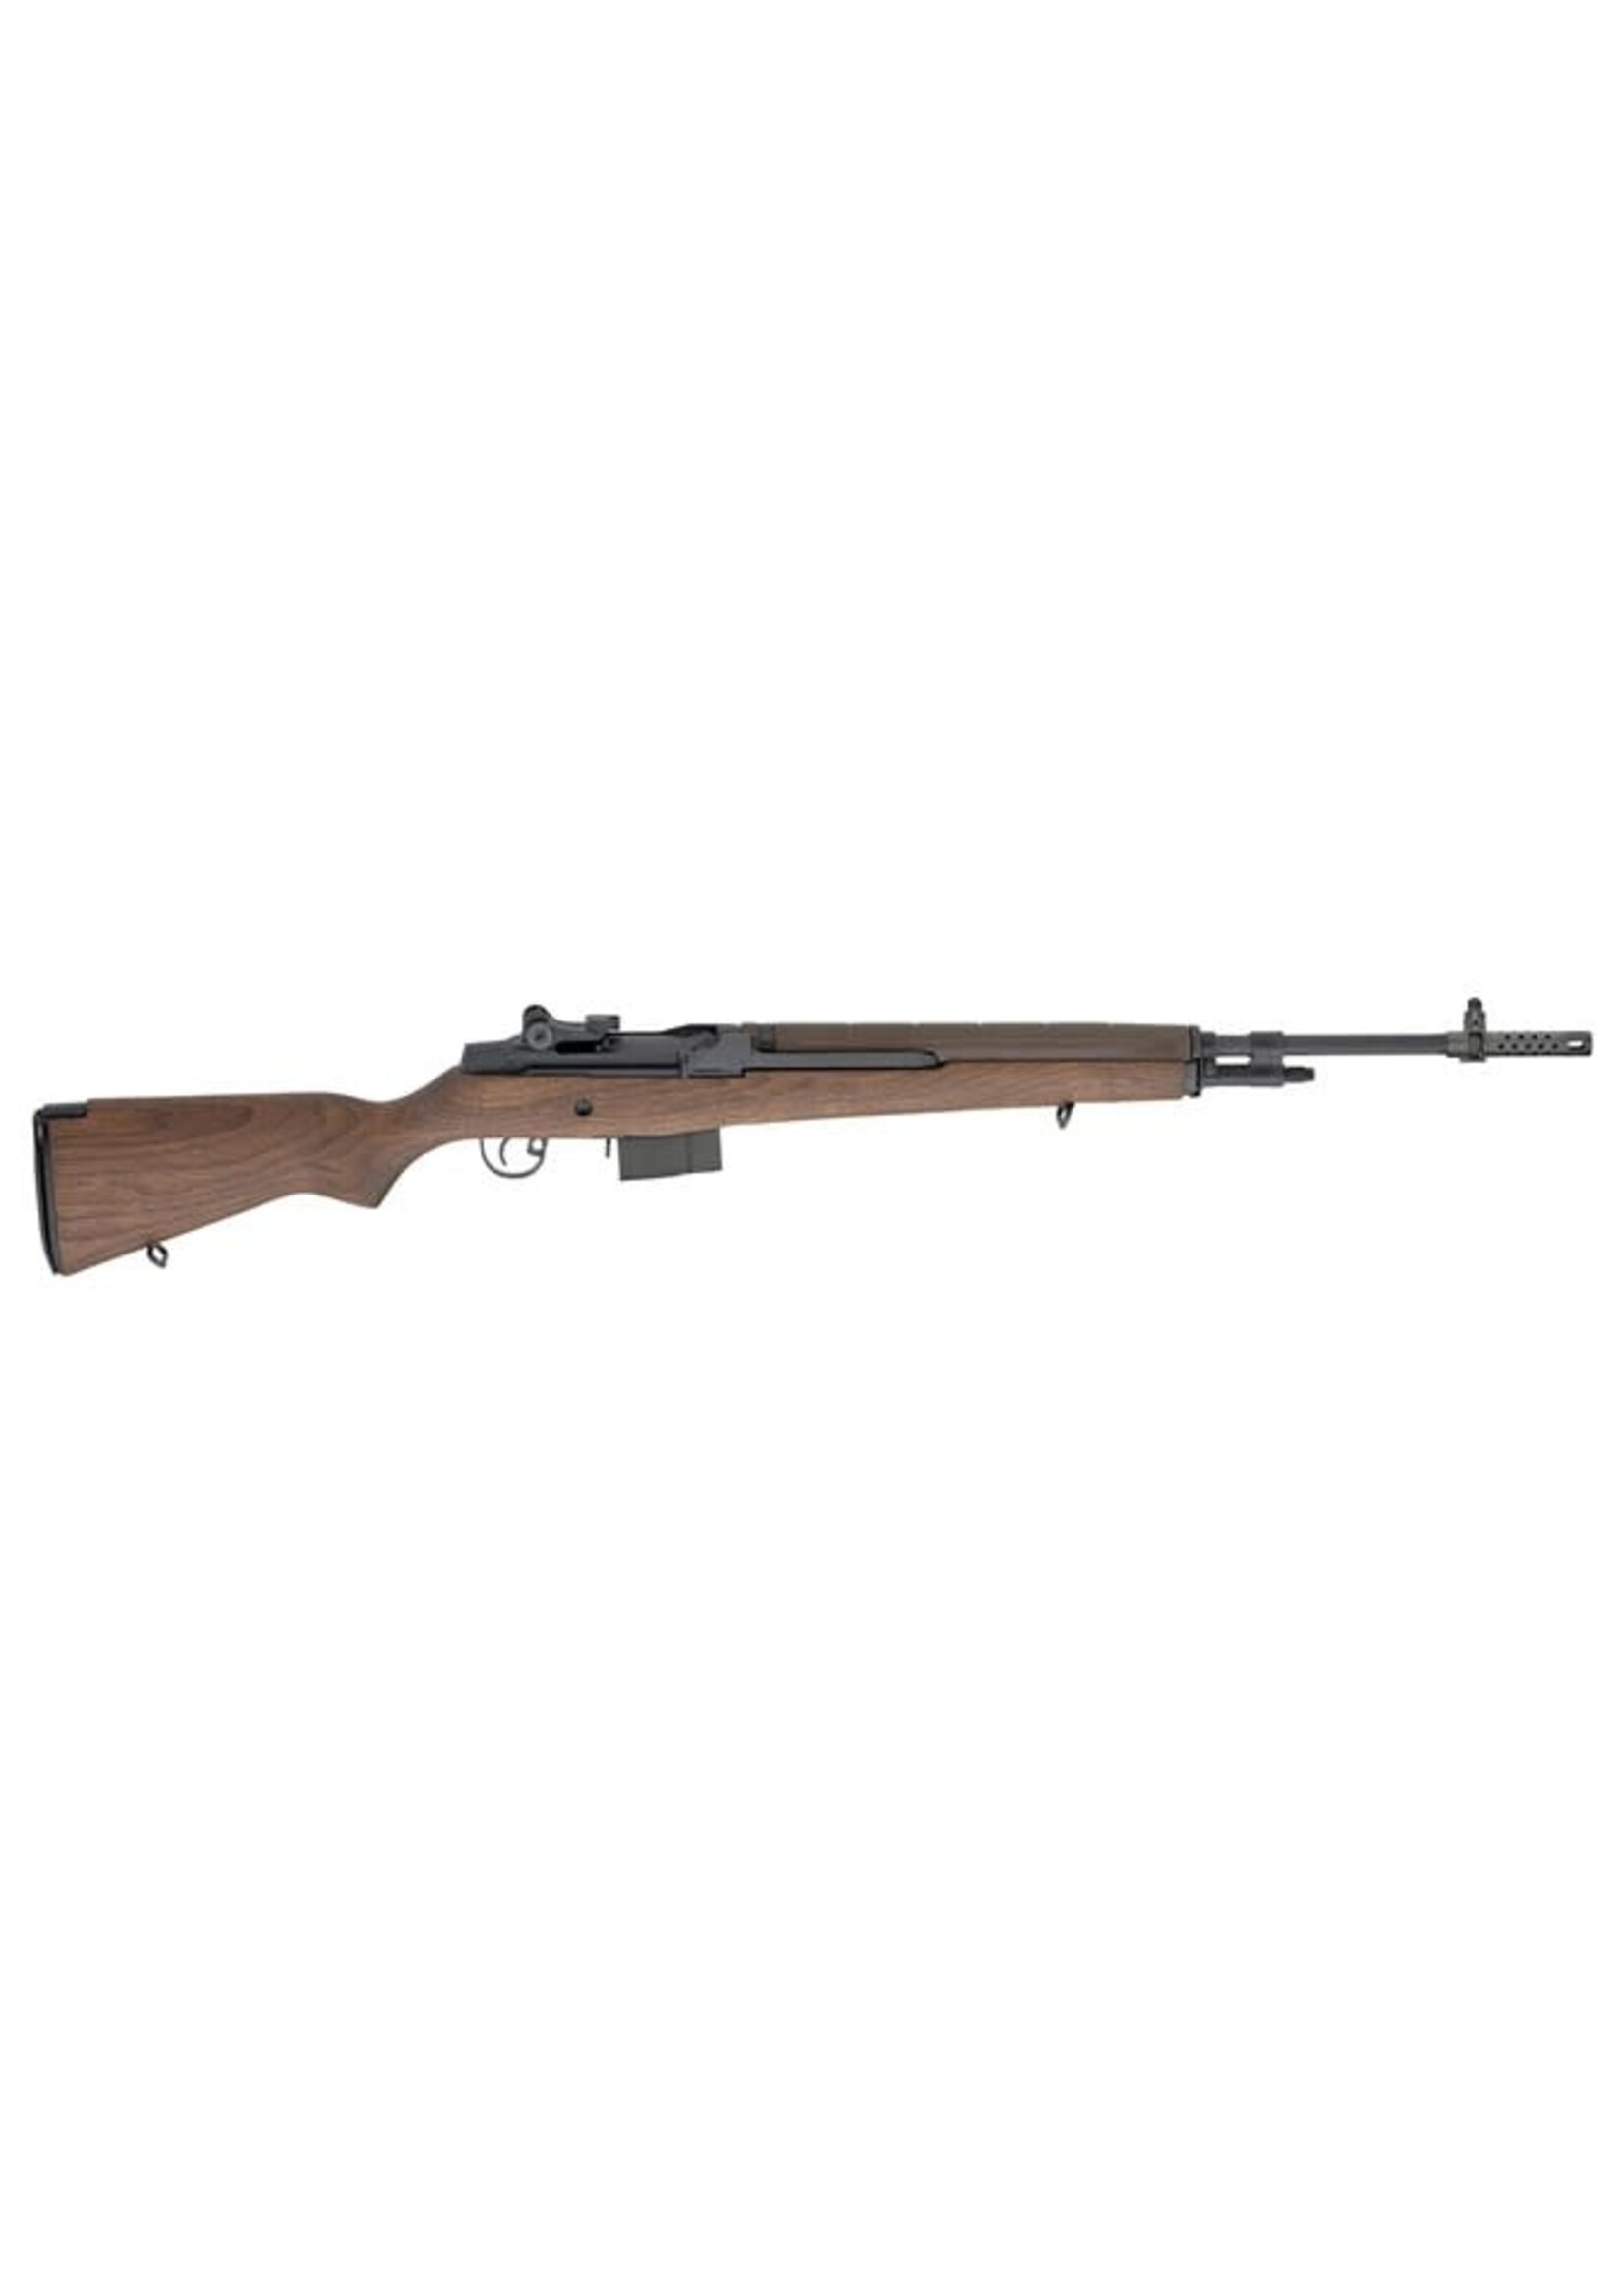 Springfield Armory Springfield Armory MA9102 M1A Standard Issue 308 Win 10+1 22" Carbon Steel Barrel w/Flash Suppressor, Black Parkerized Receiver, Two-Stage Military Trigger, Walnut Stock